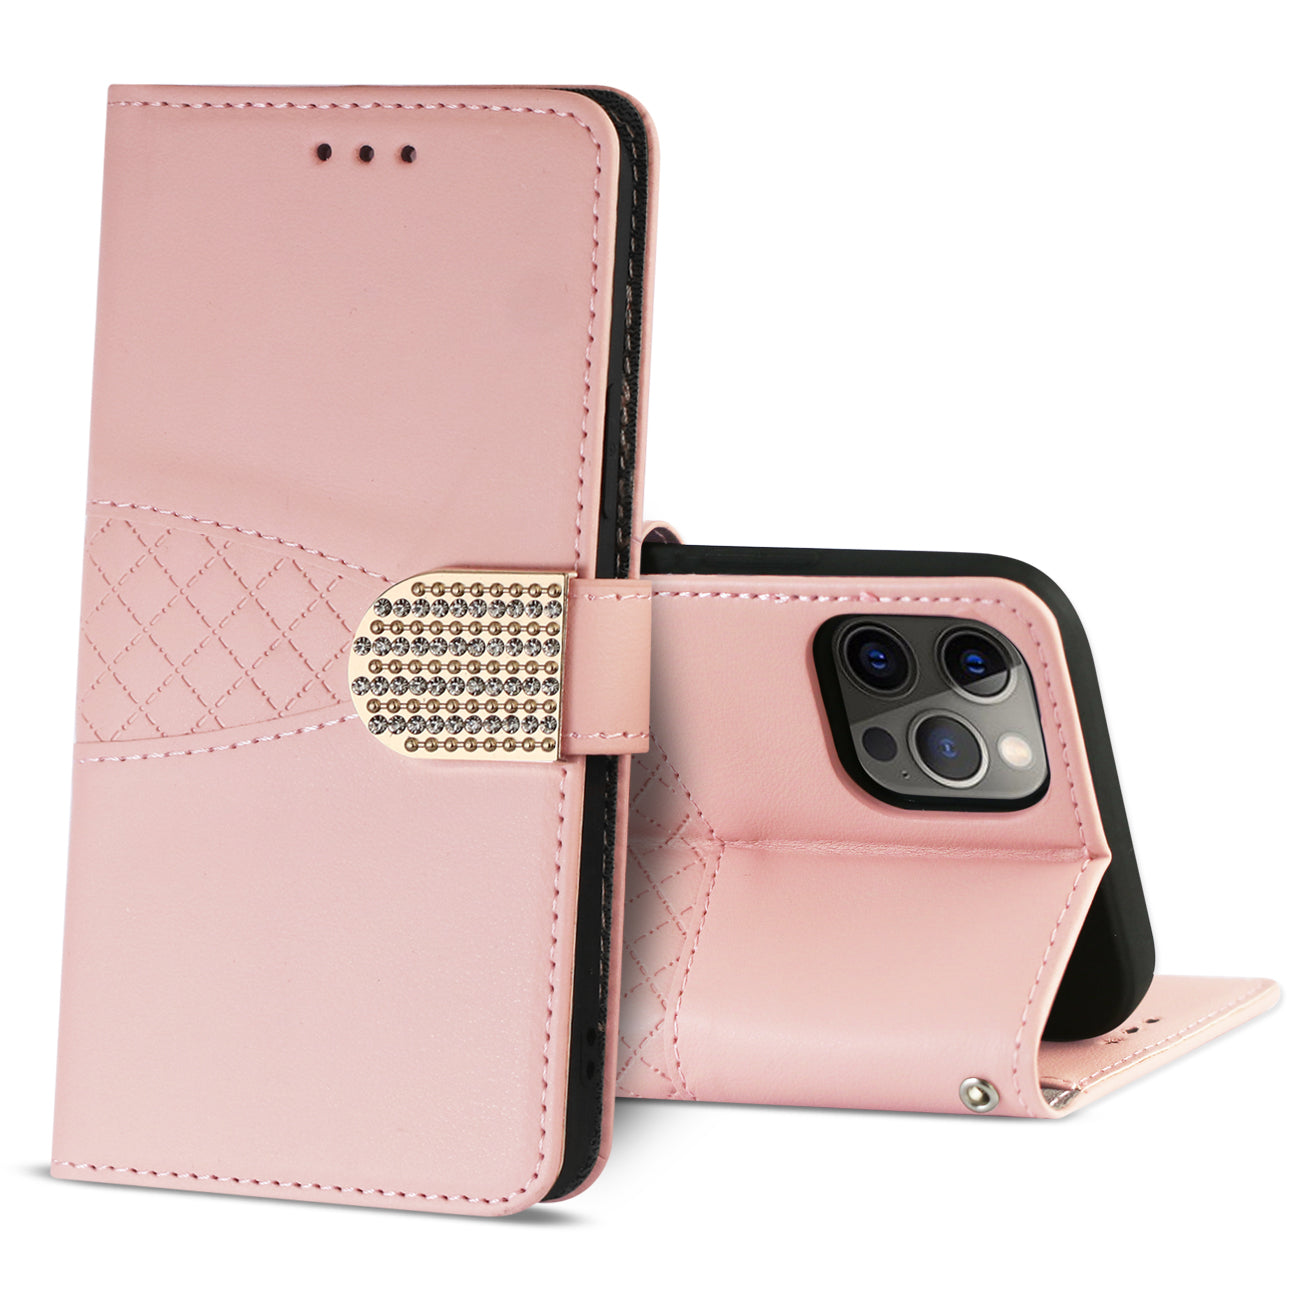 Reiko 3-In-1 Wallet Case for IPHONE 12/ IPHONE 12 PRO In Pink